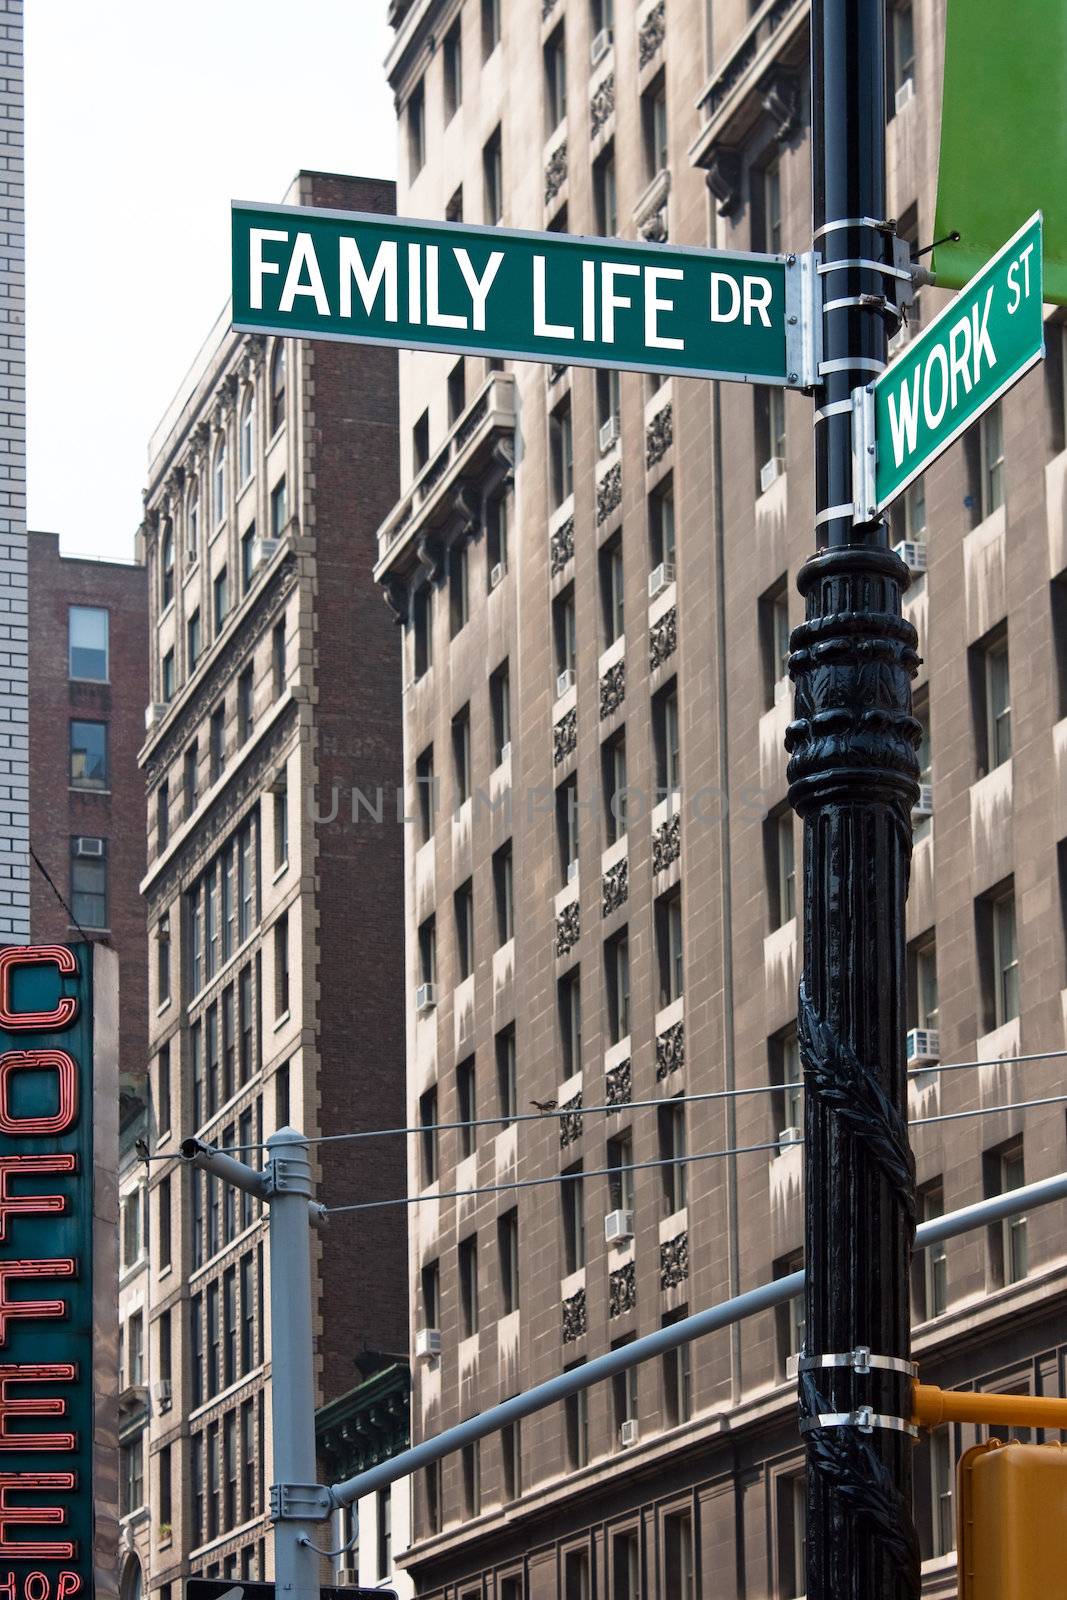 Two street signs representing the balance needed between work and family life.